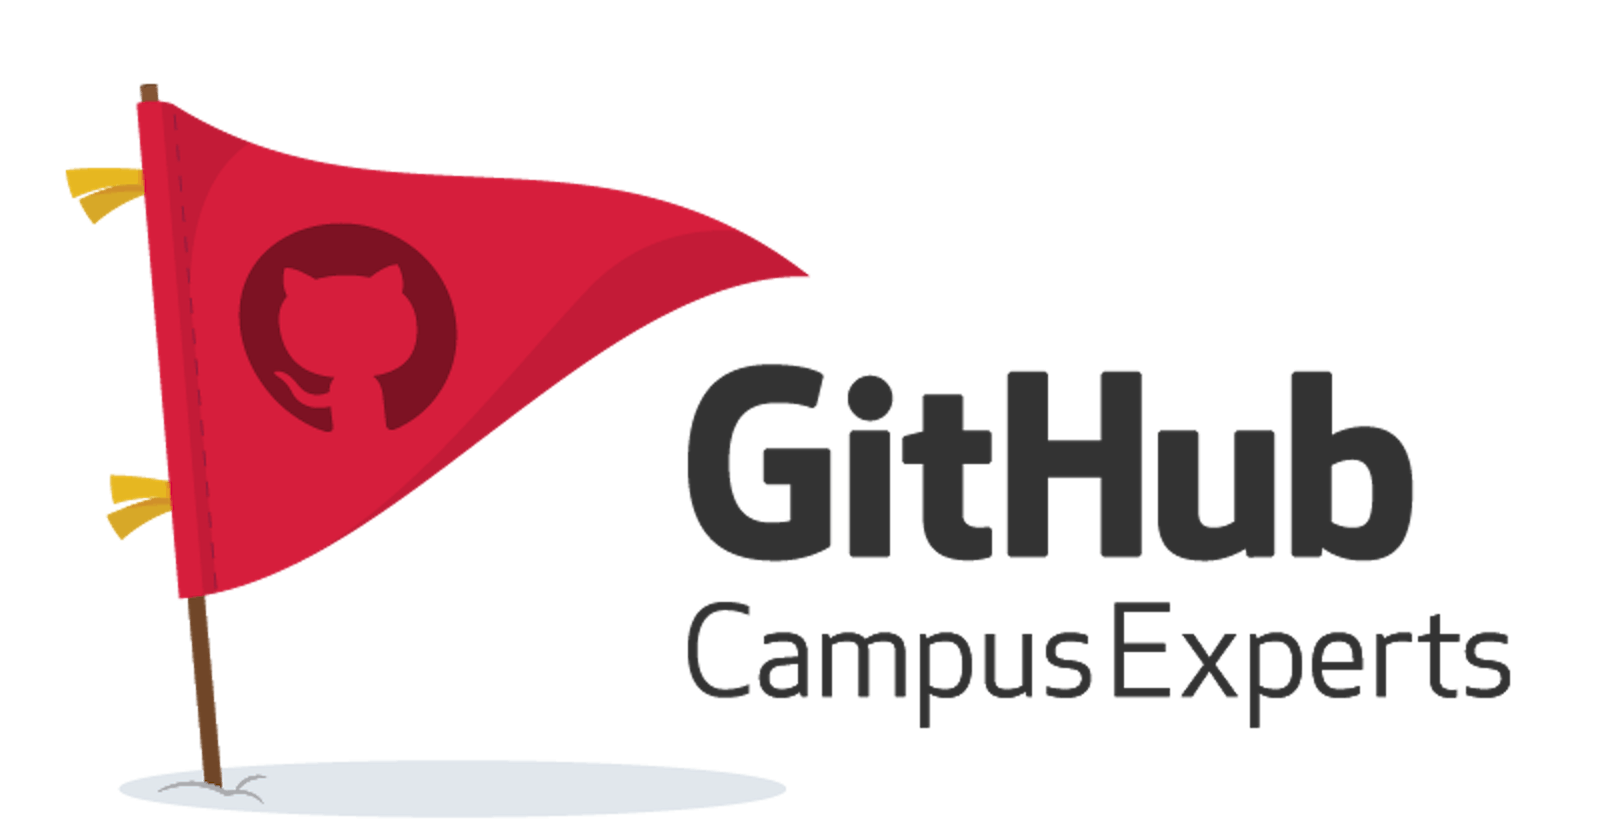 A step-by-step guide to applying for GitHub Campus Expert